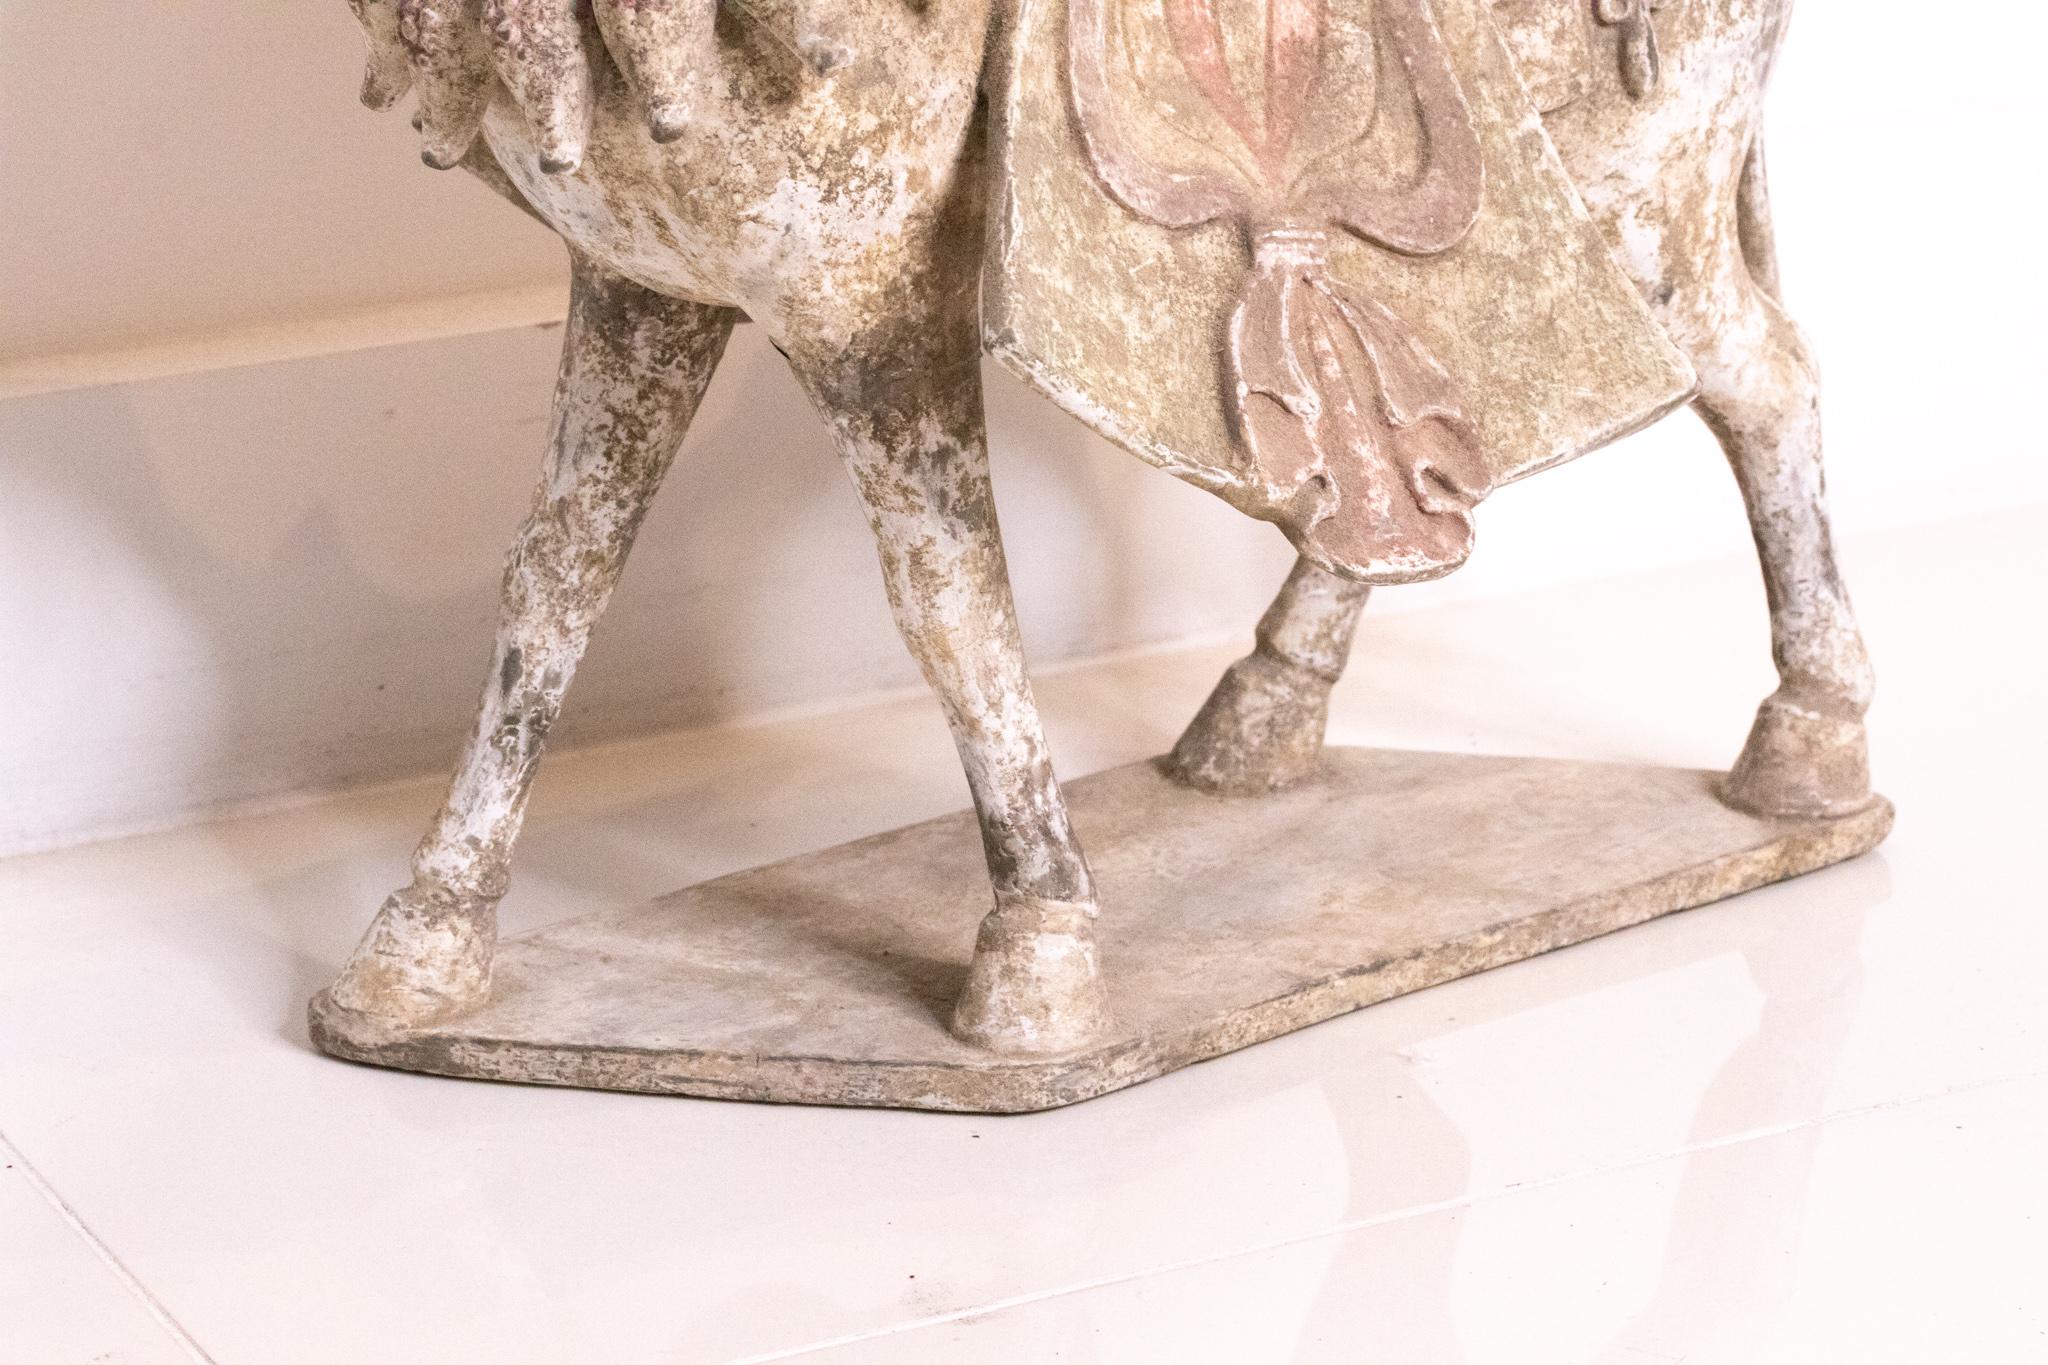 18th Century and Earlier China 549-577 AD Northern Qi Dynasty Ancient Caparisoned Horse in Earthenware For Sale